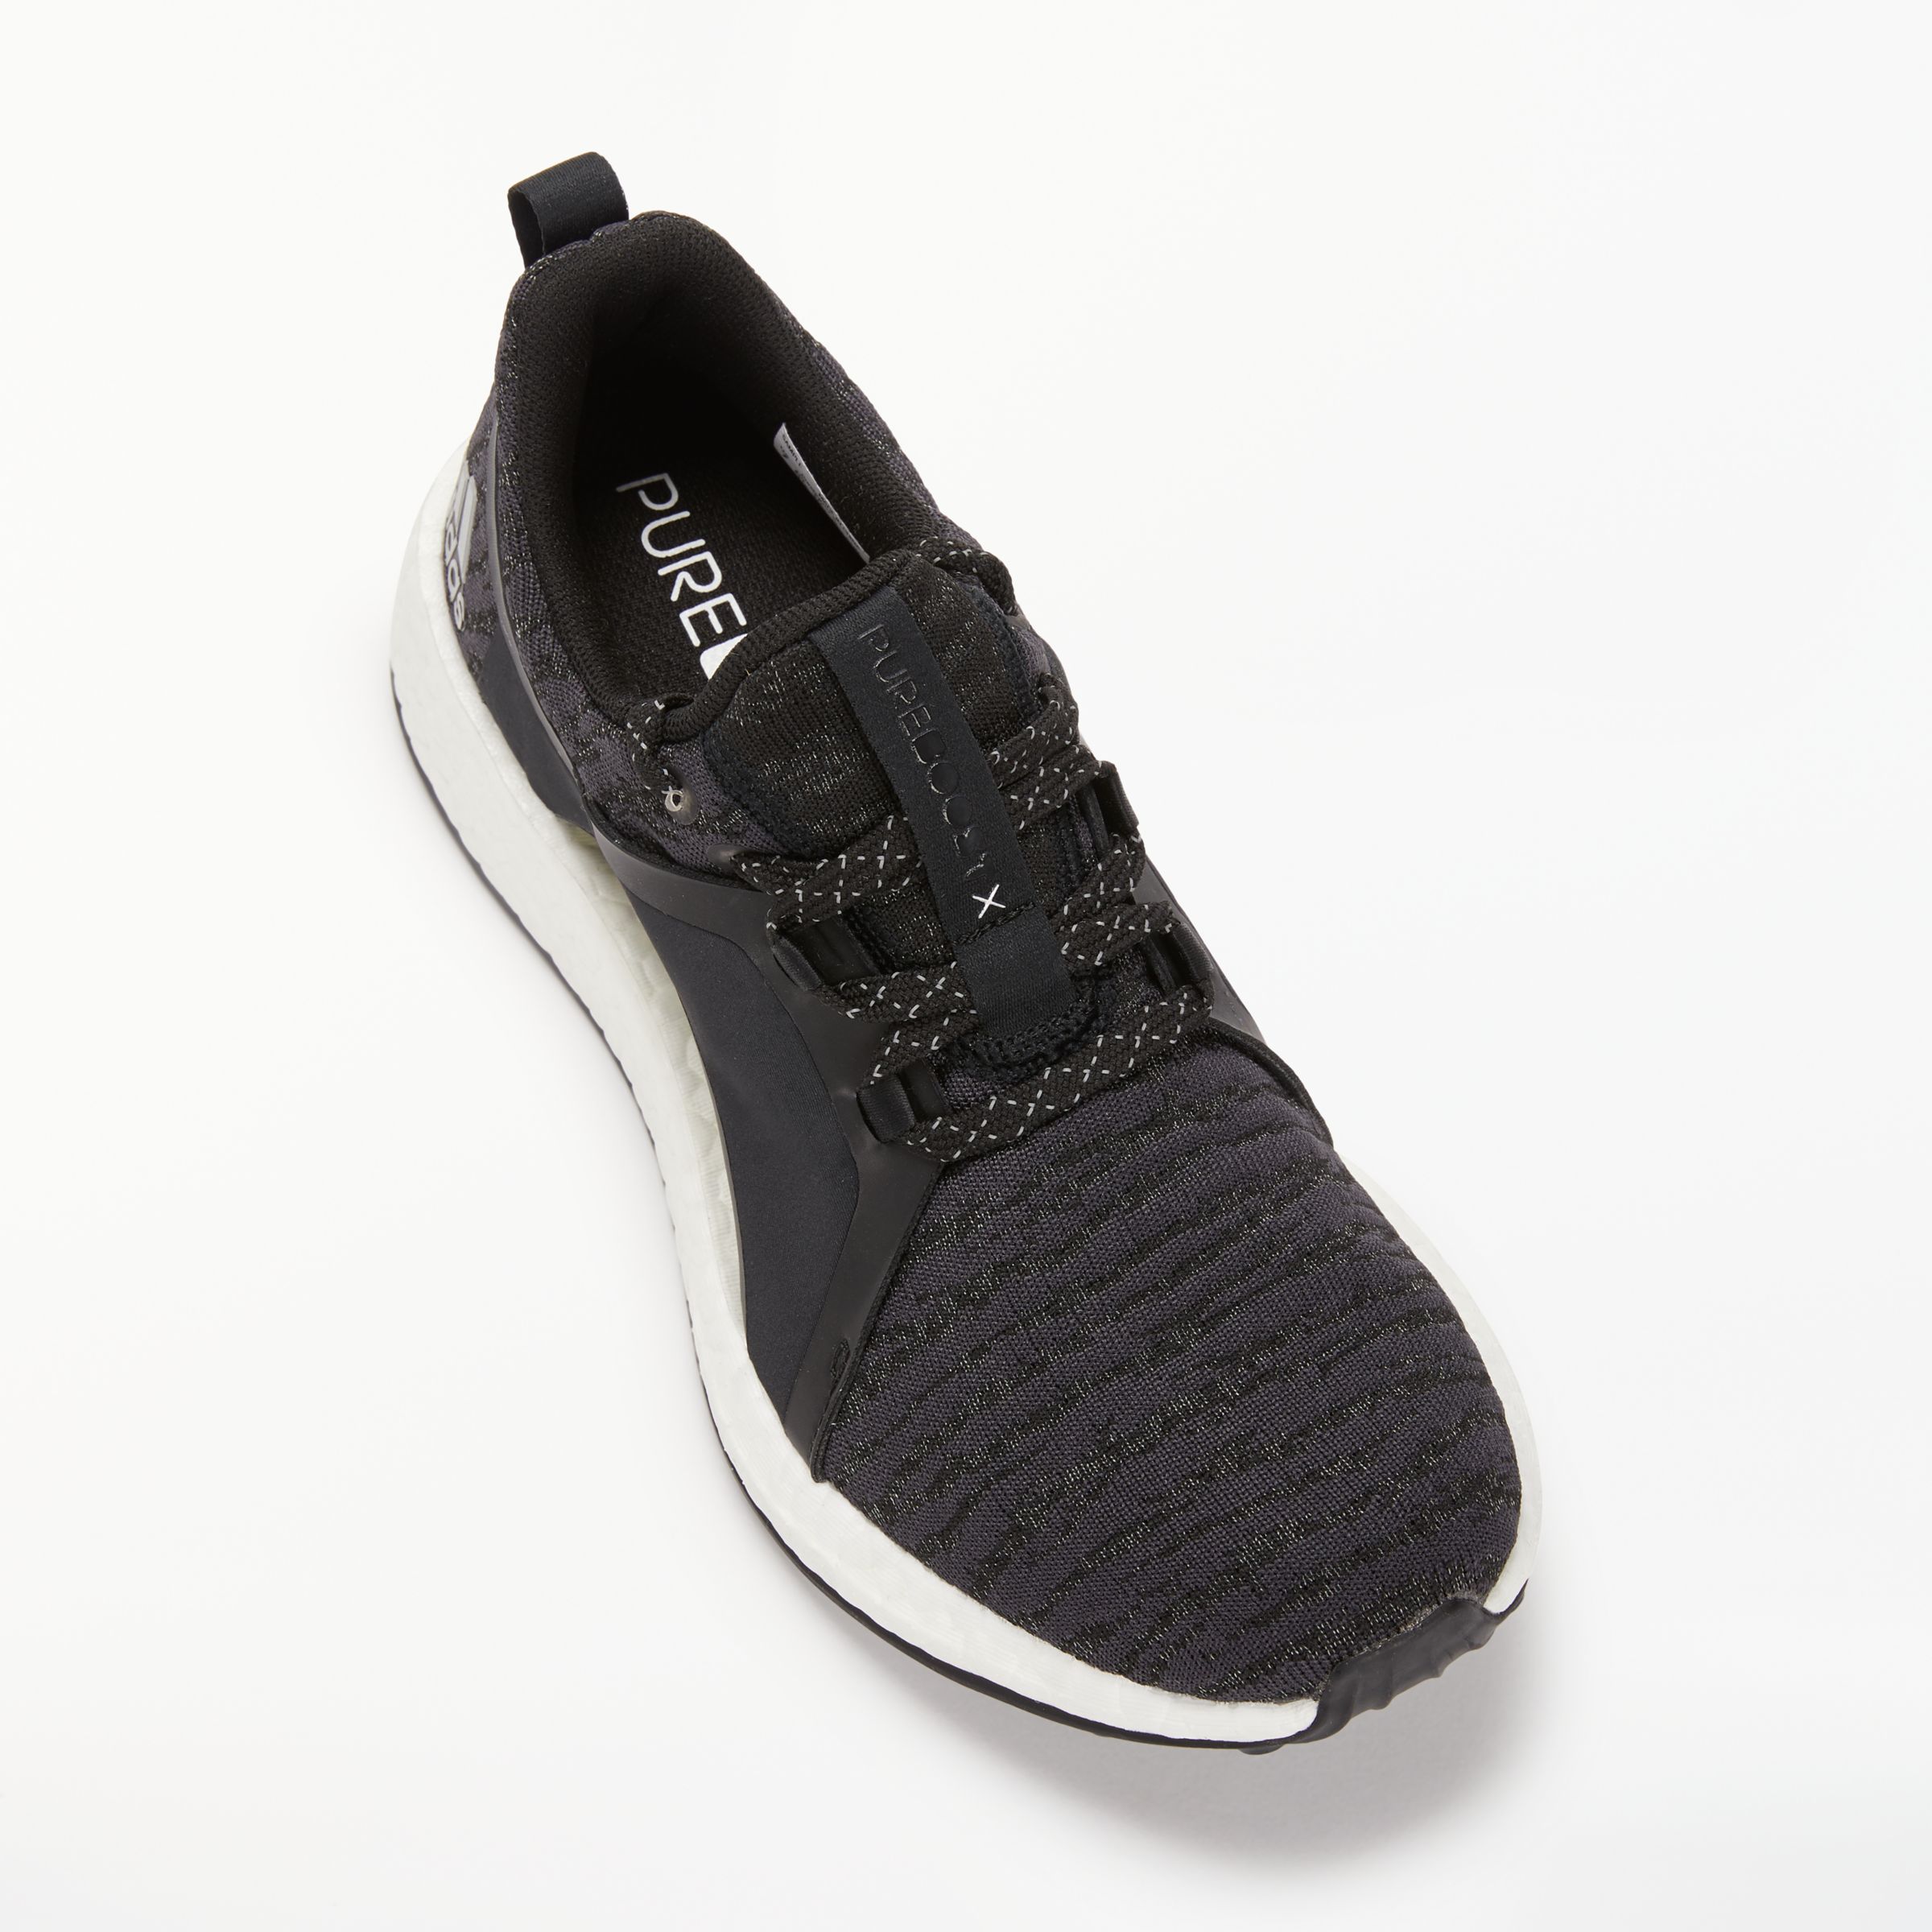 adidas pure boost x women's running shoes